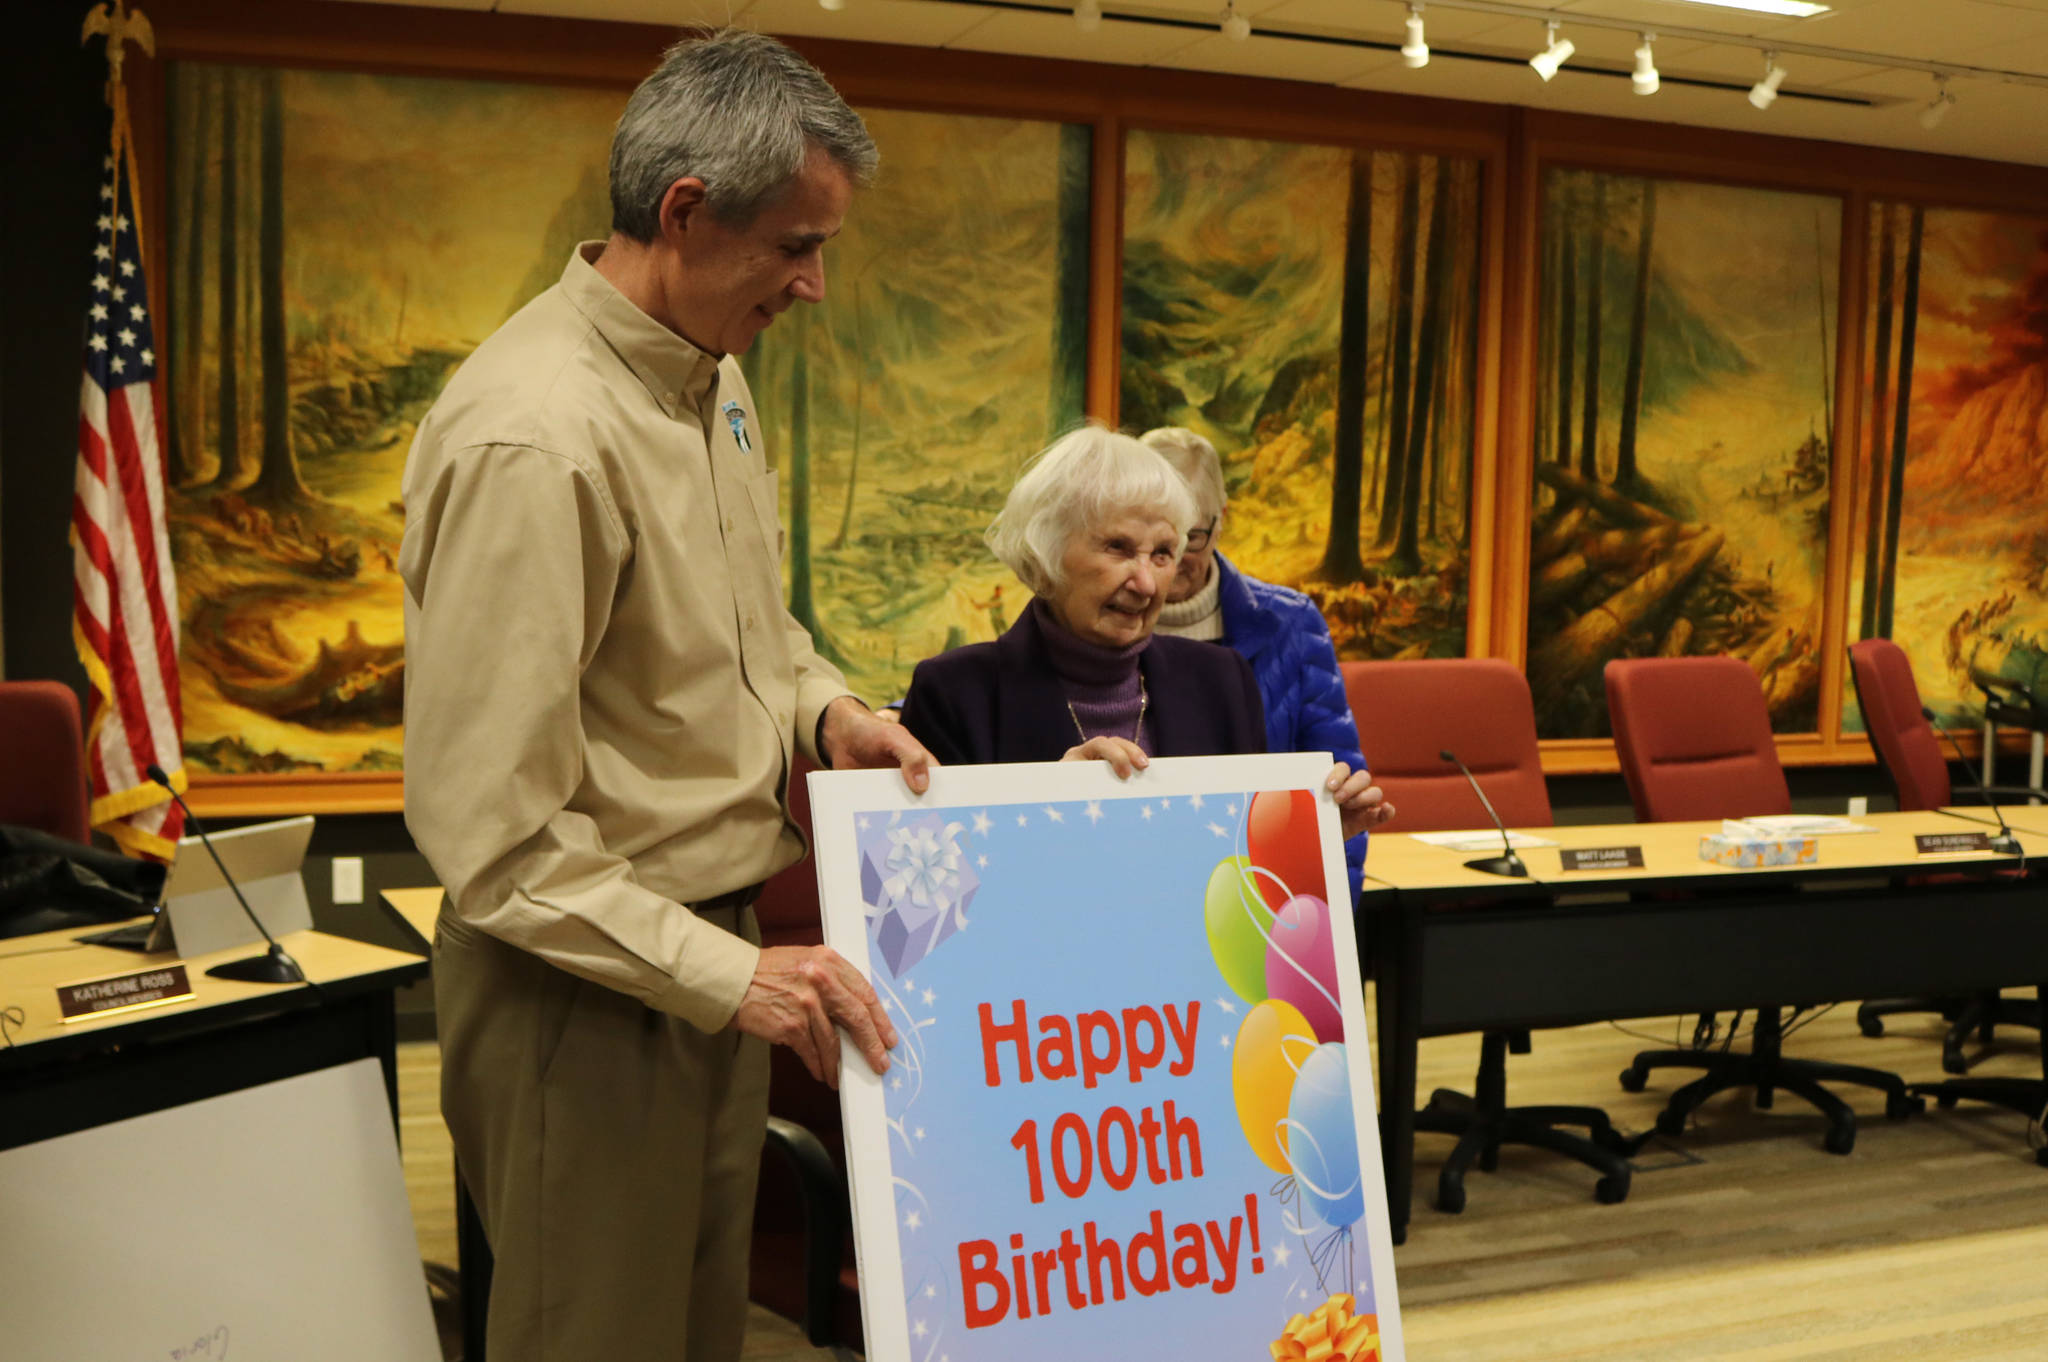 Gloria McNeely was presented with a large card as part of her 100th birthday celebration at city all on Feb. 25. Evan Pappas/Staff Photo